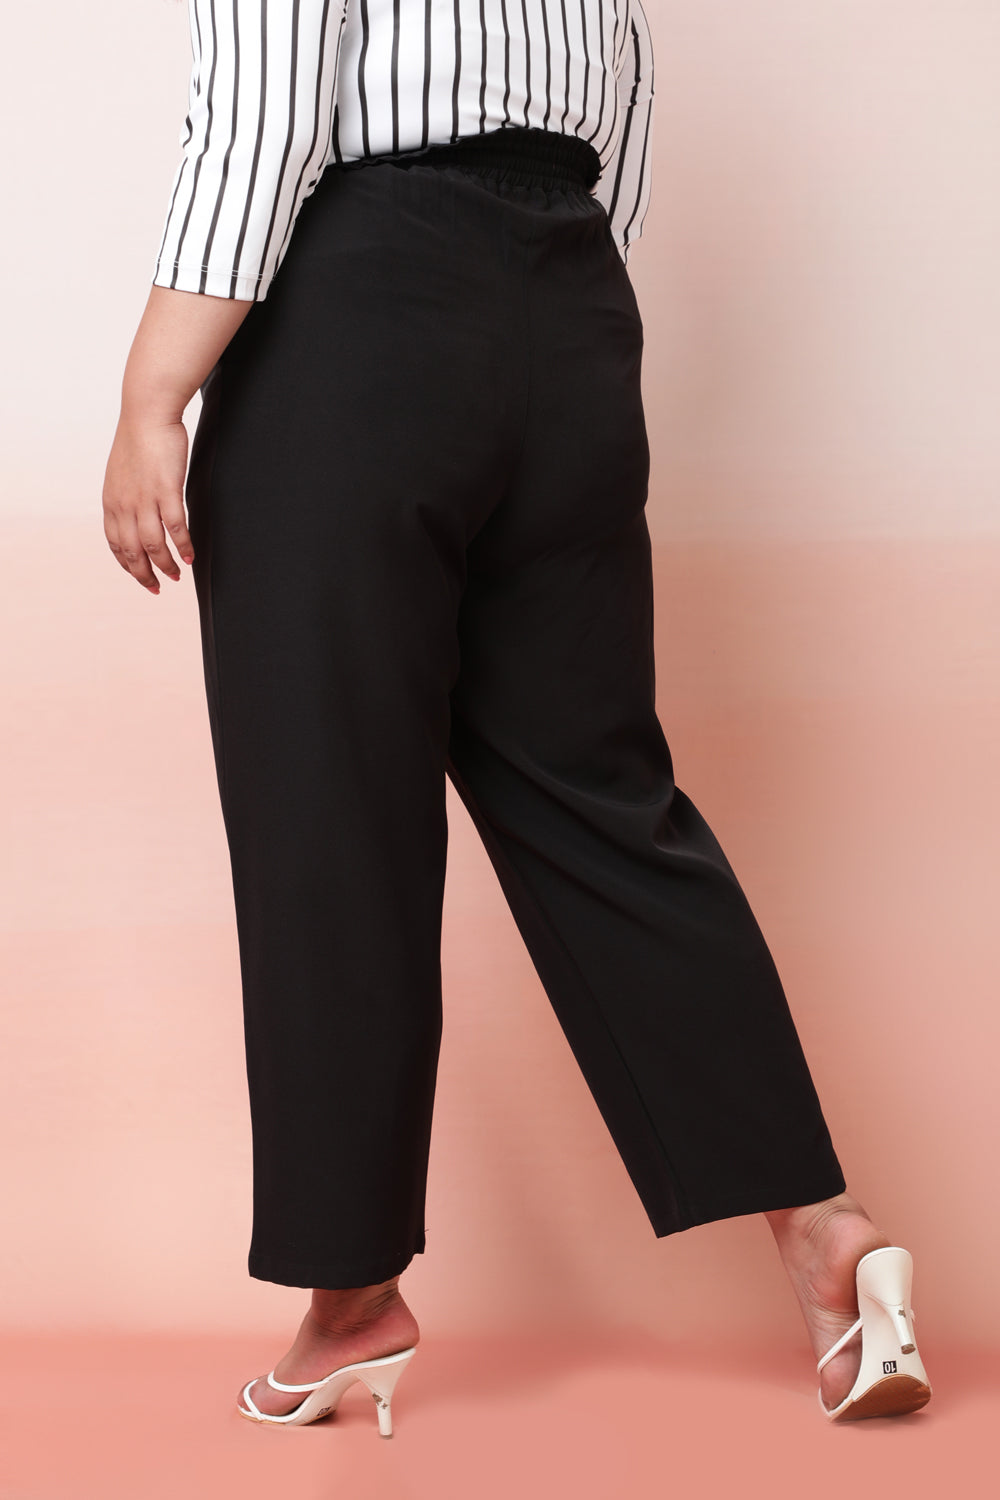 HSMQHJWE Womans Clothes 20 Plus Size Dress Pants Womens Black Work Pants  Solid Stretch High Waist Zipper High Waist Straight Pants With Pocket Trousers  Plus Size Pants Cute 